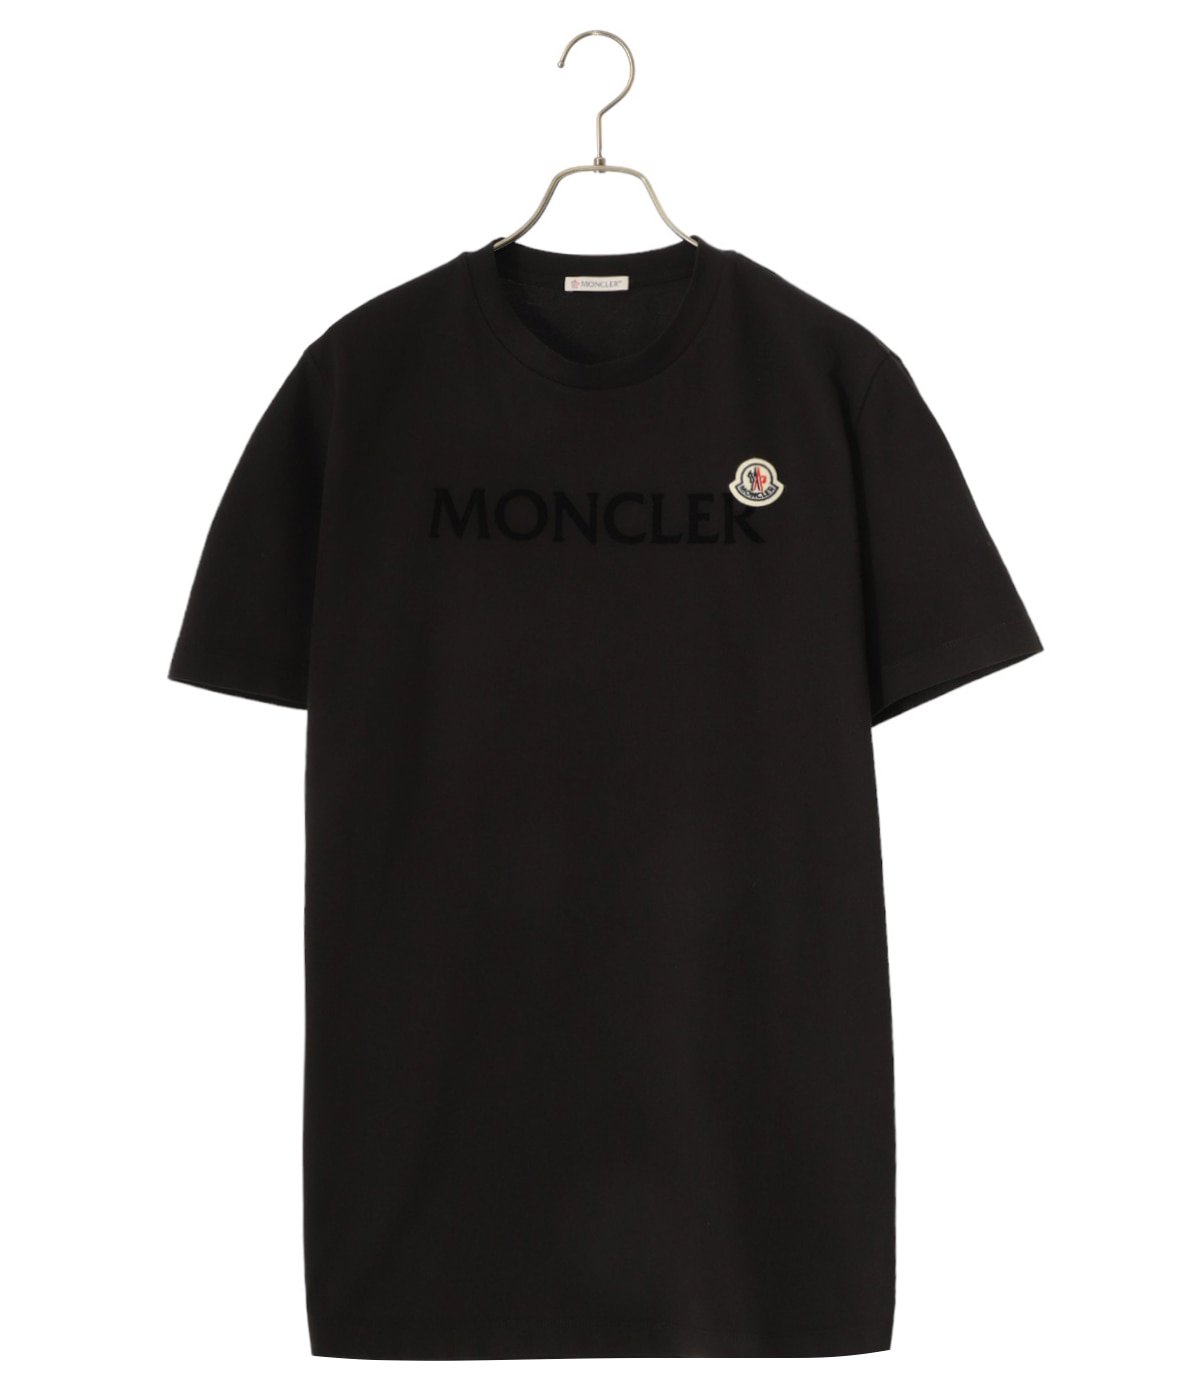 MONCLER モンクレール MAGLIA T-SHIRTS プリント半袖Tシャツカットソー